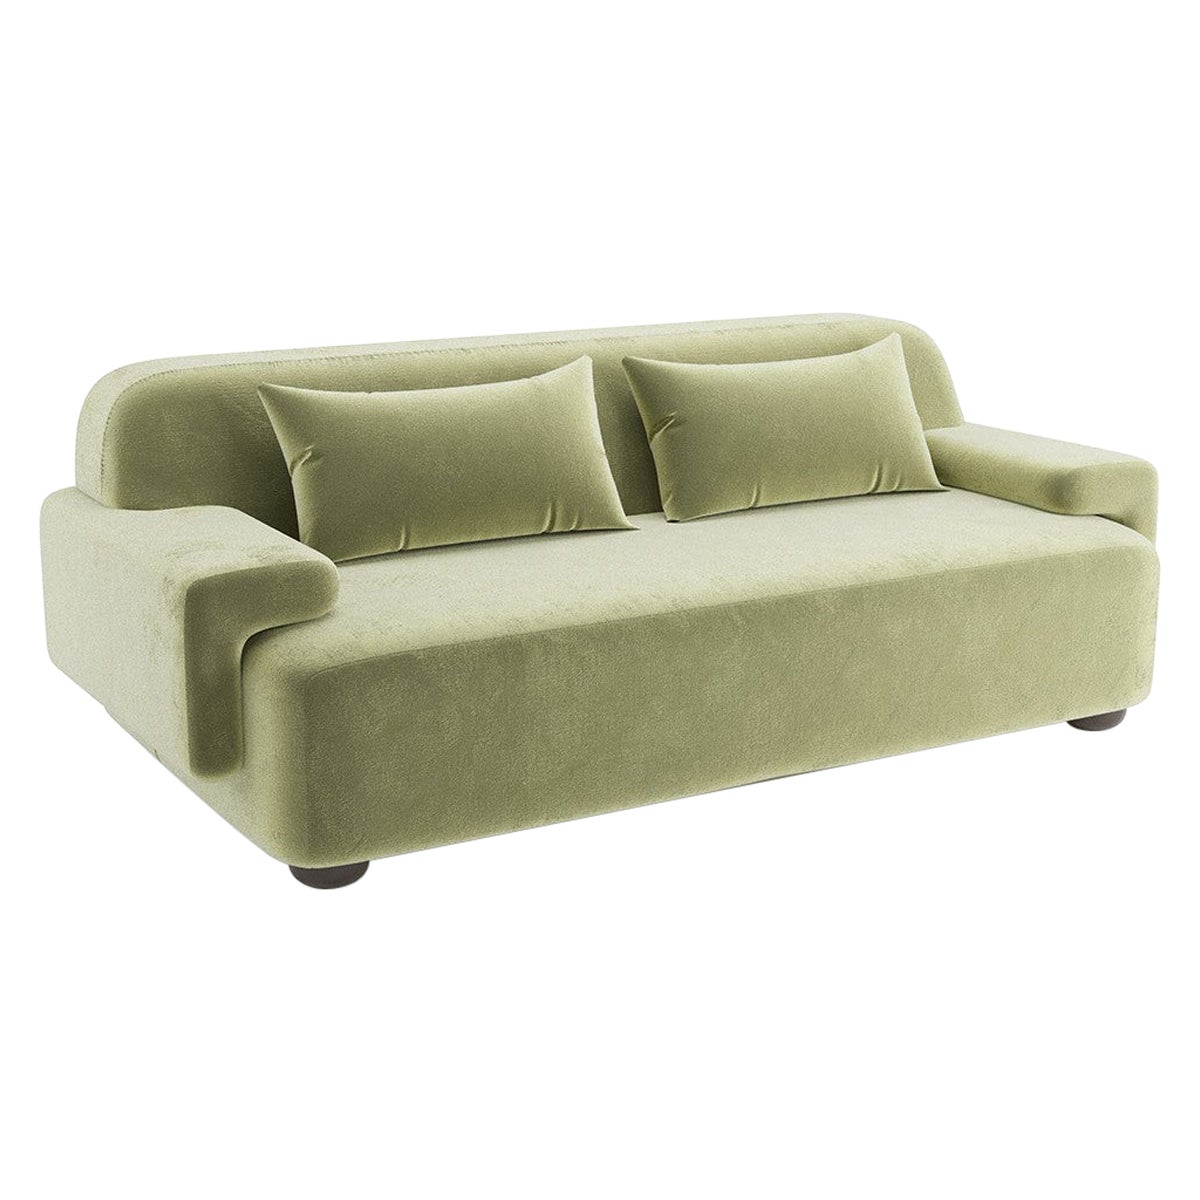 Popus Editions Lena 2.5 Seater Sofa in Almond Green Como Velvet Upholstery For Sale